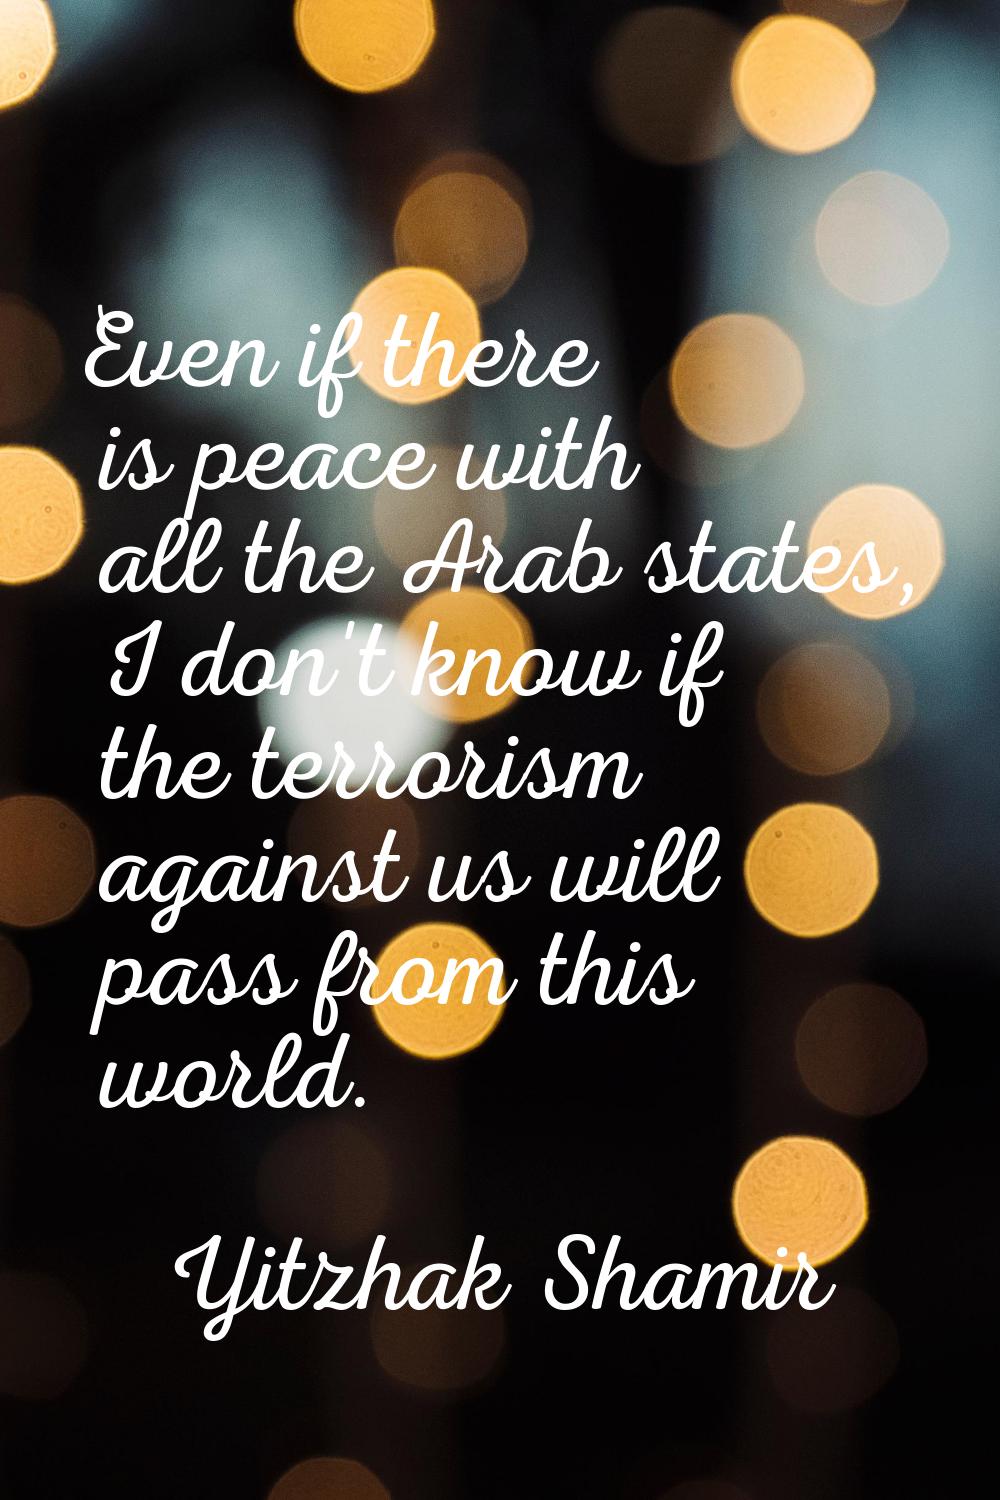 Even if there is peace with all the Arab states, I don't know if the terrorism against us will pass